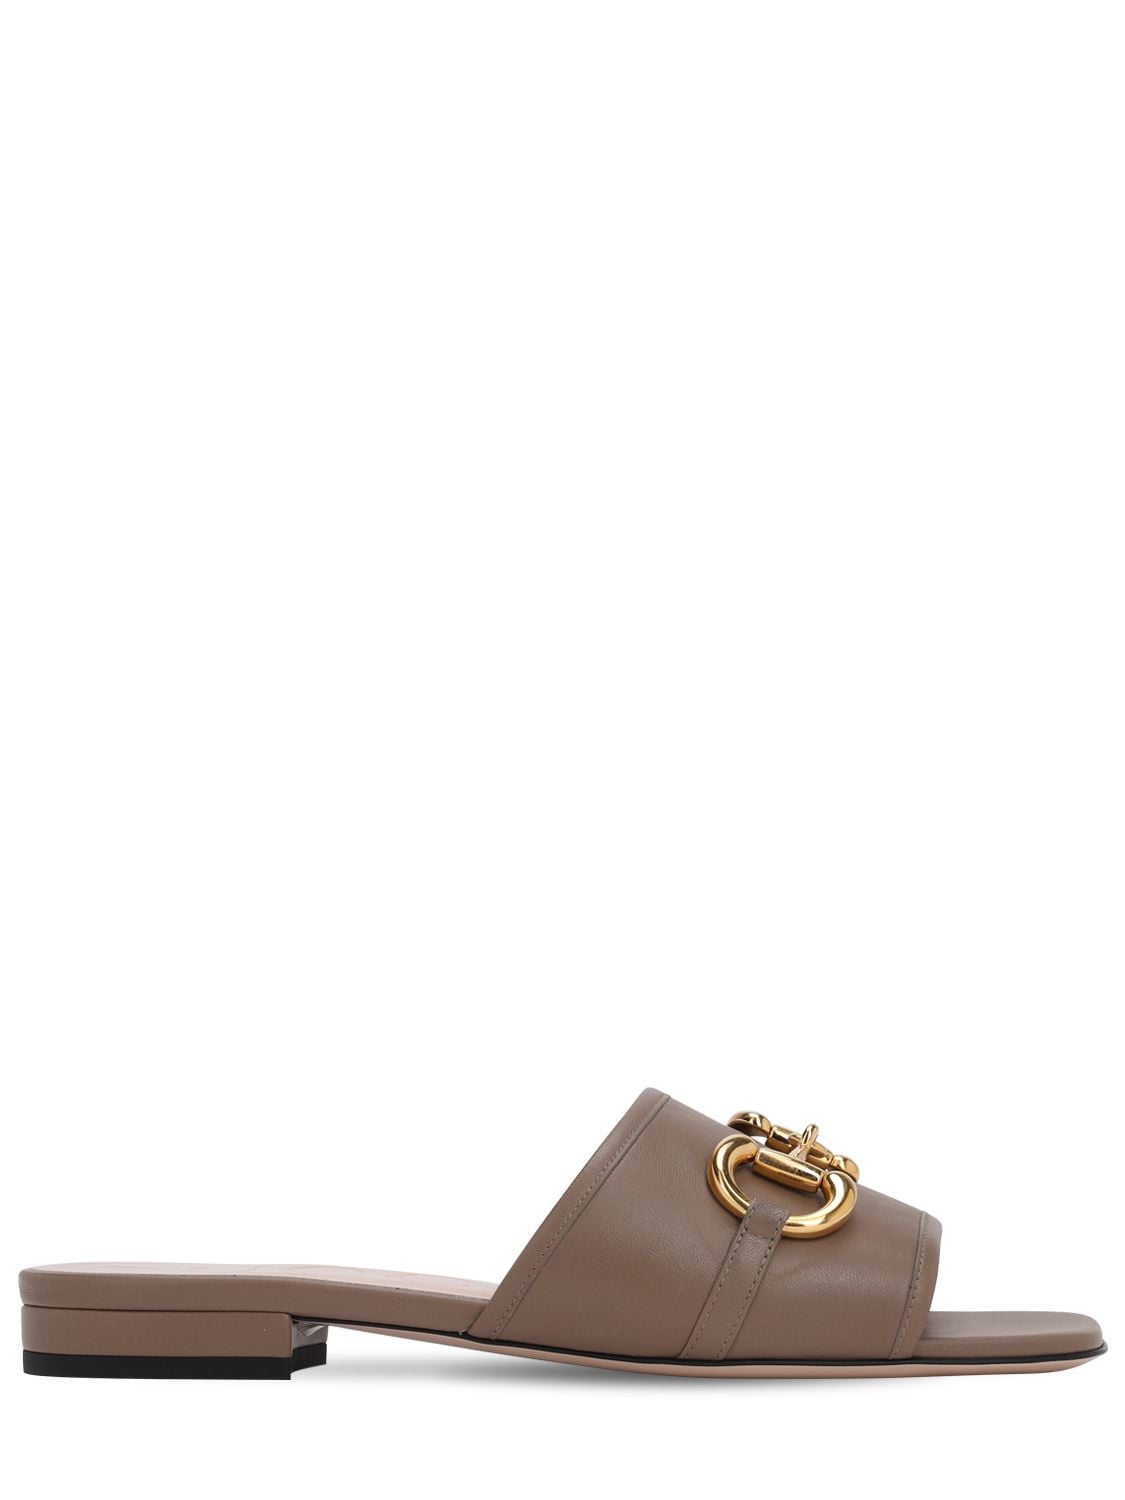 Gucci 10mm Deva Leather Sandals In Taupe